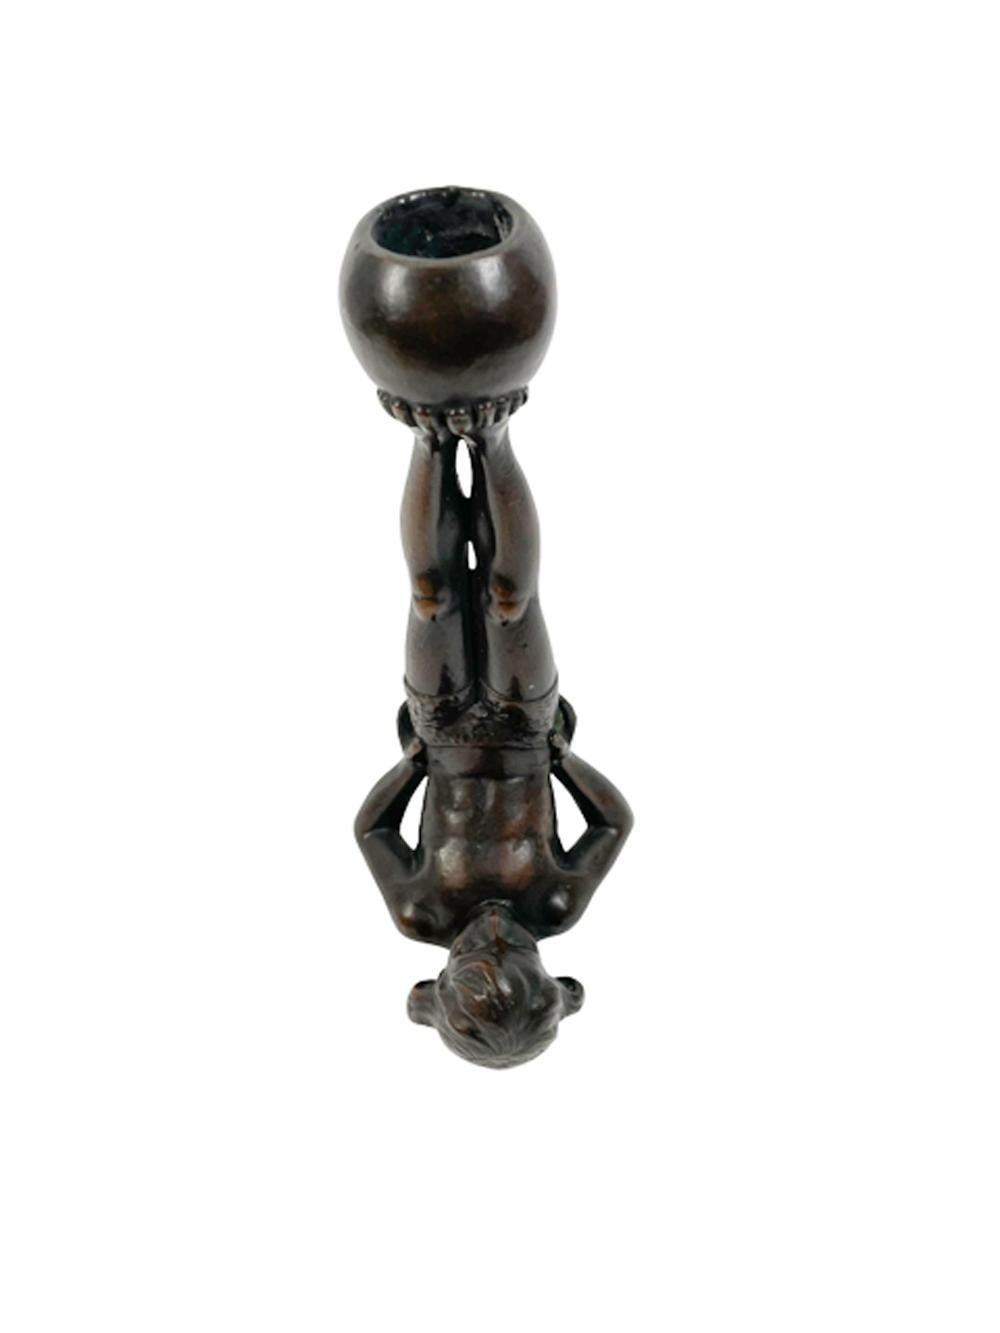 Unusual early 20th century patinated copper figural candlestick in the form of a boy wearing gym shorts and standing on his shoulders propped up by his arms and with his feet in the air holding an exercise ball. 